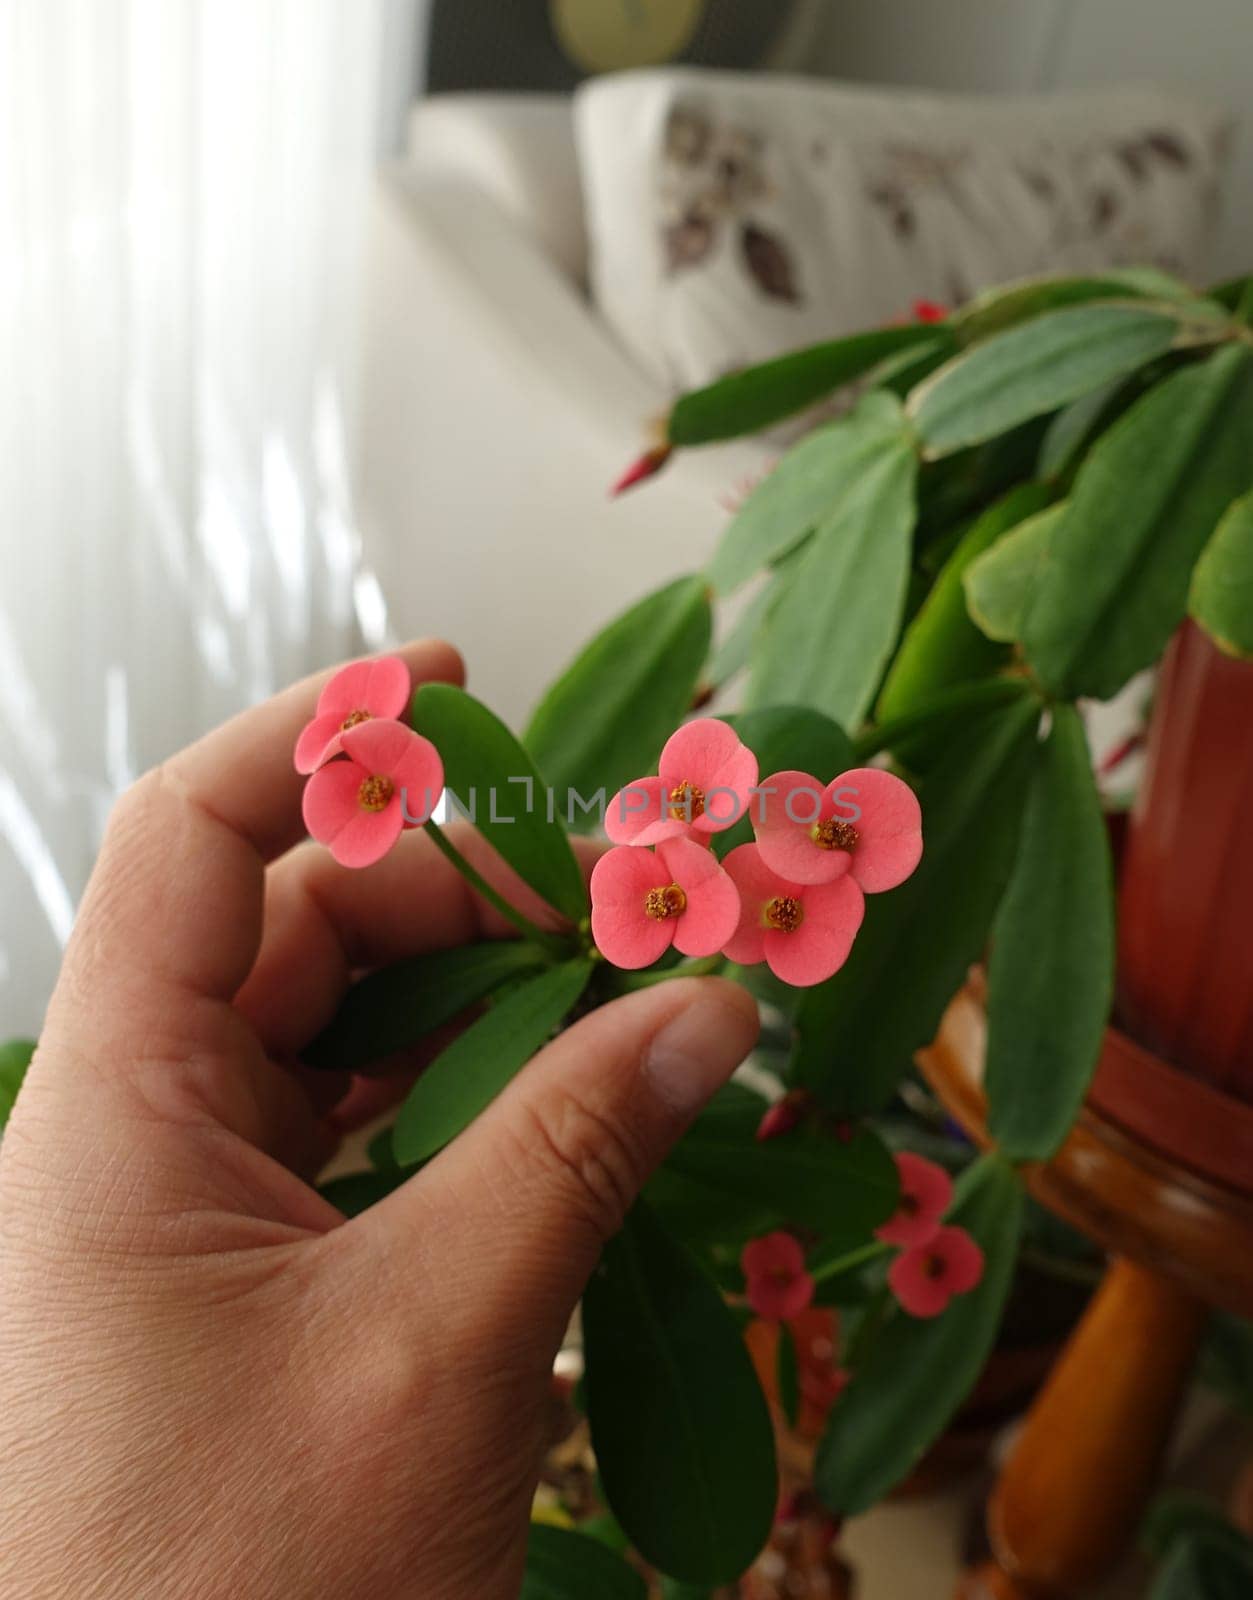 crown of thorns in flower pot,close-up crown of thorns,pink flower crown of thorns,